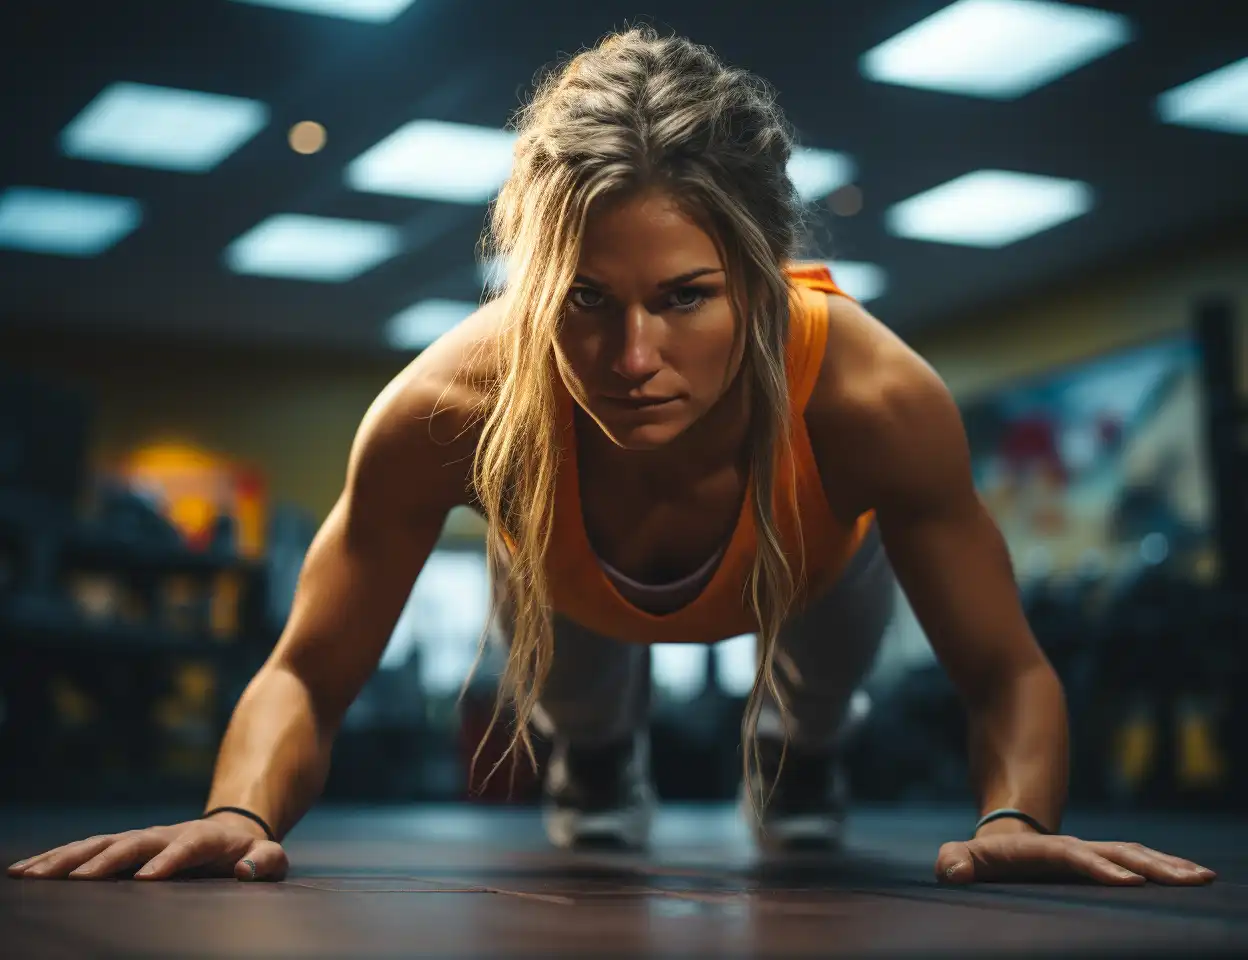 Woman doing pushups at the gym